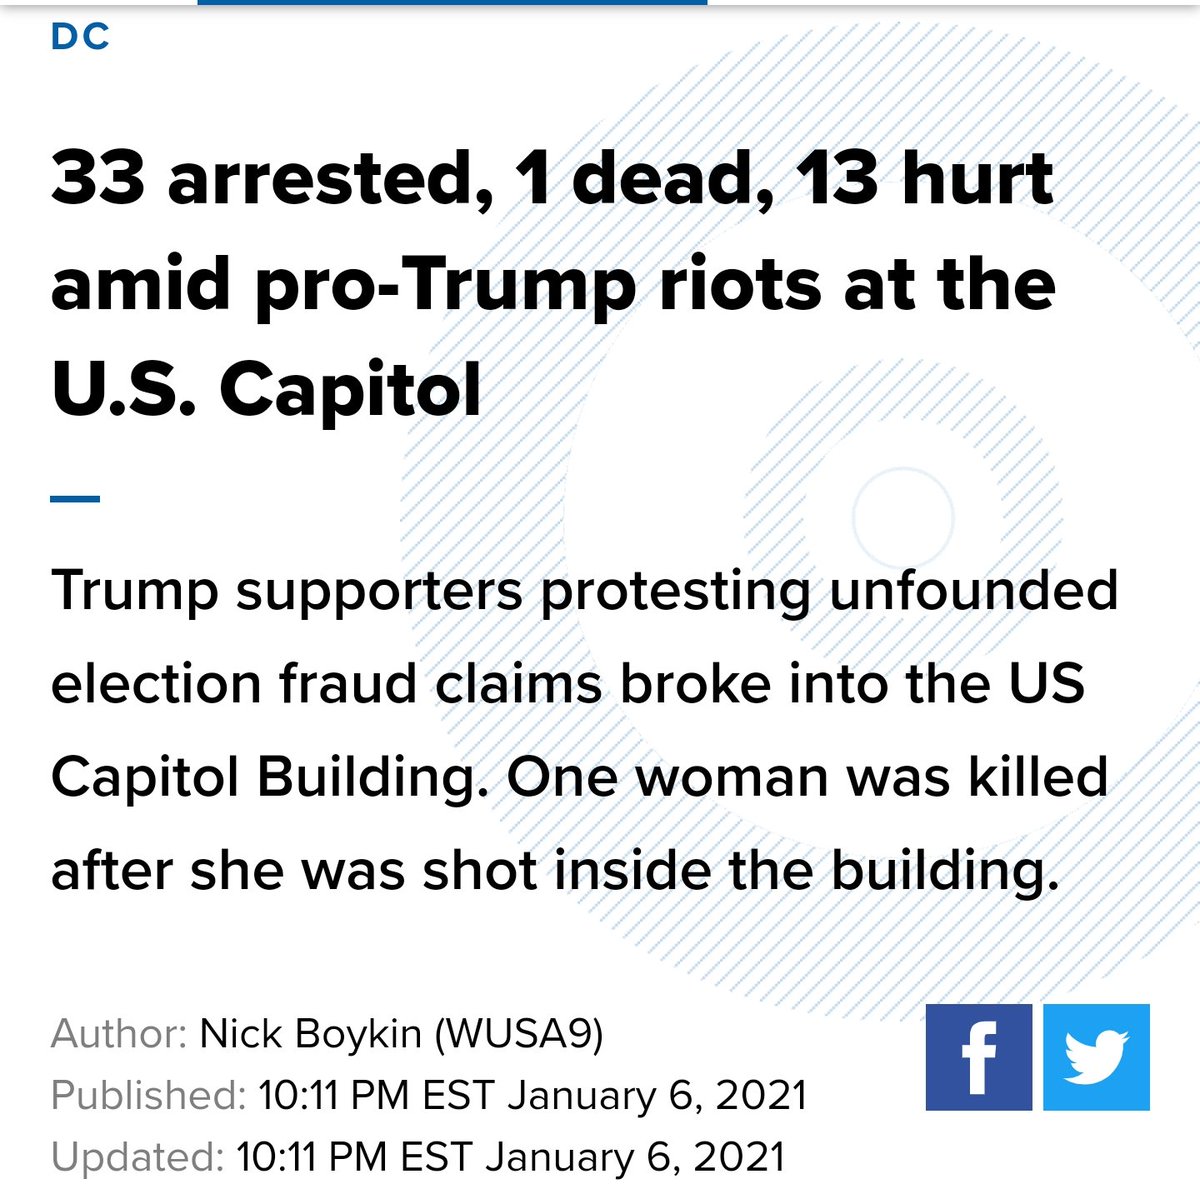 And yet...THOUSANDS of mostly white people attempted a violent overthrow of the government in broad daylight.... Only 33 arrested. THIS is how white supremacy will kill what's left of this country. When an armed coup results in fewer arrests than a  #BlackLivesMatter   March